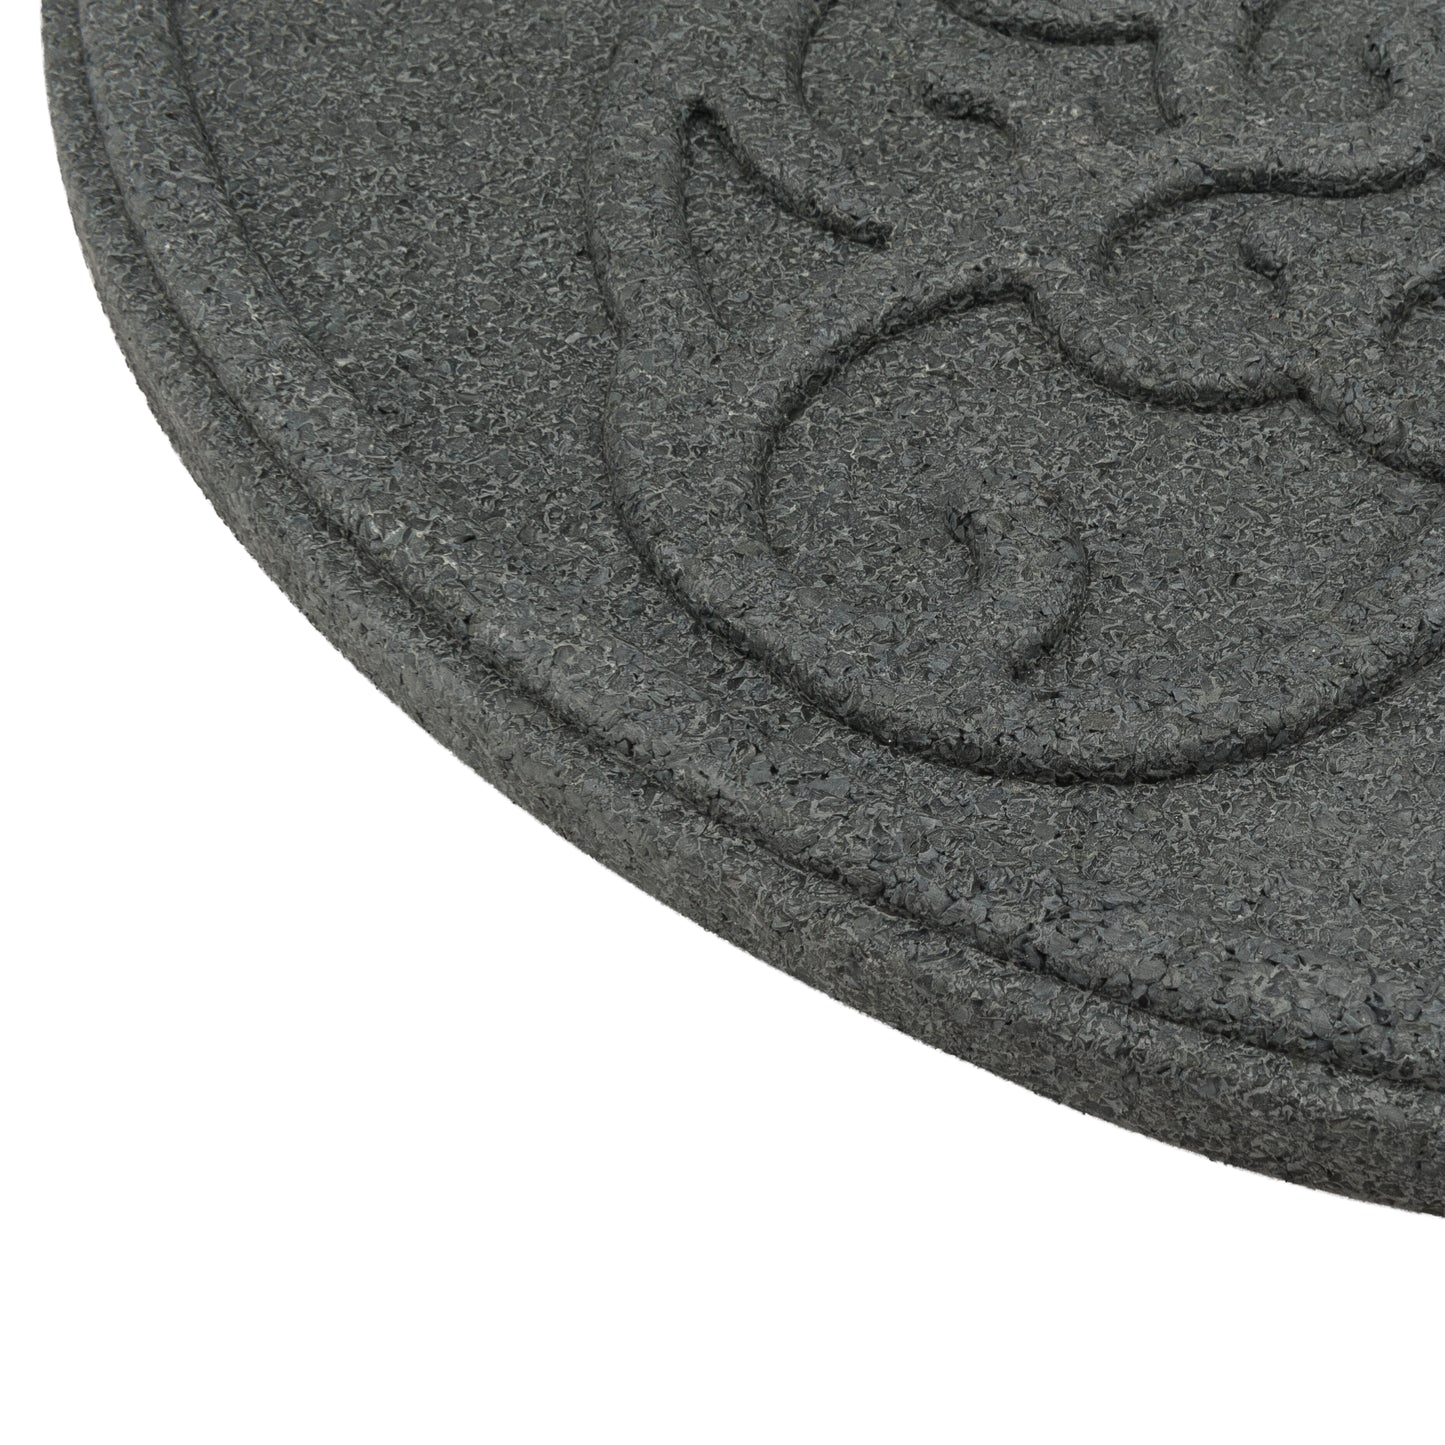 Eco-Friendly Garden Stepping Stones - Butterfly - Grey